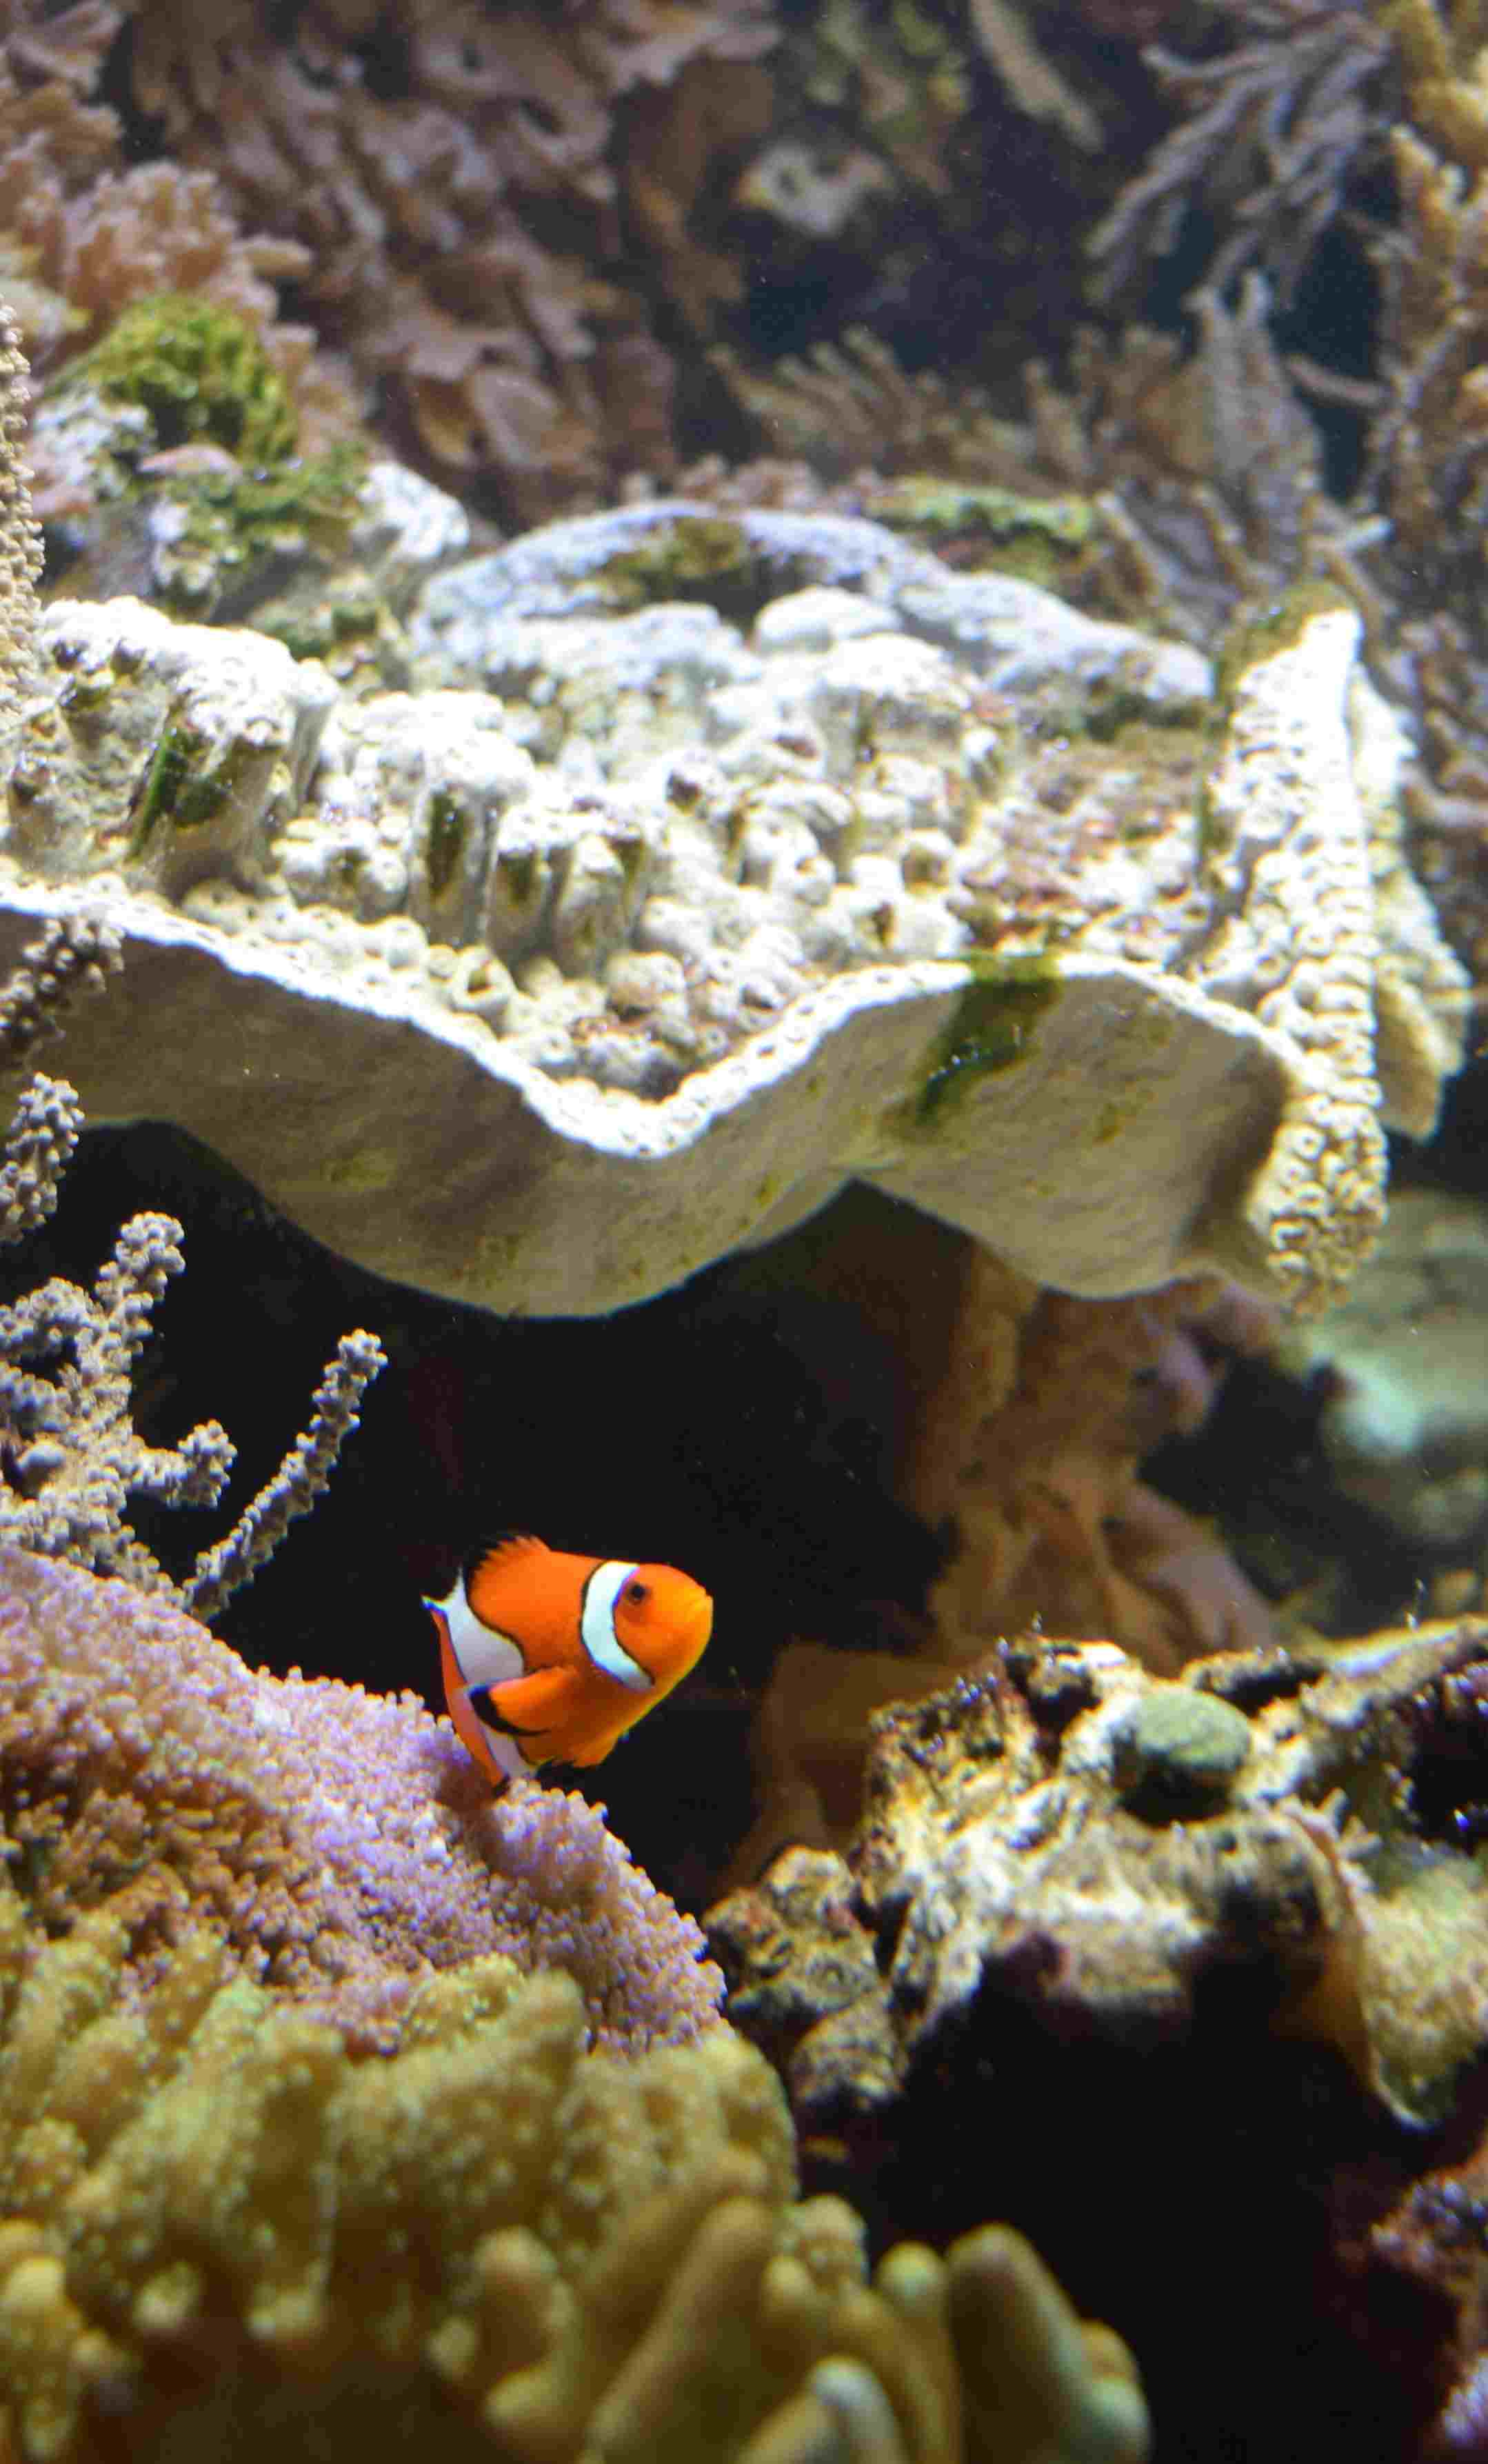 Clown fish peeking out from its hiding spot within a coral reef.